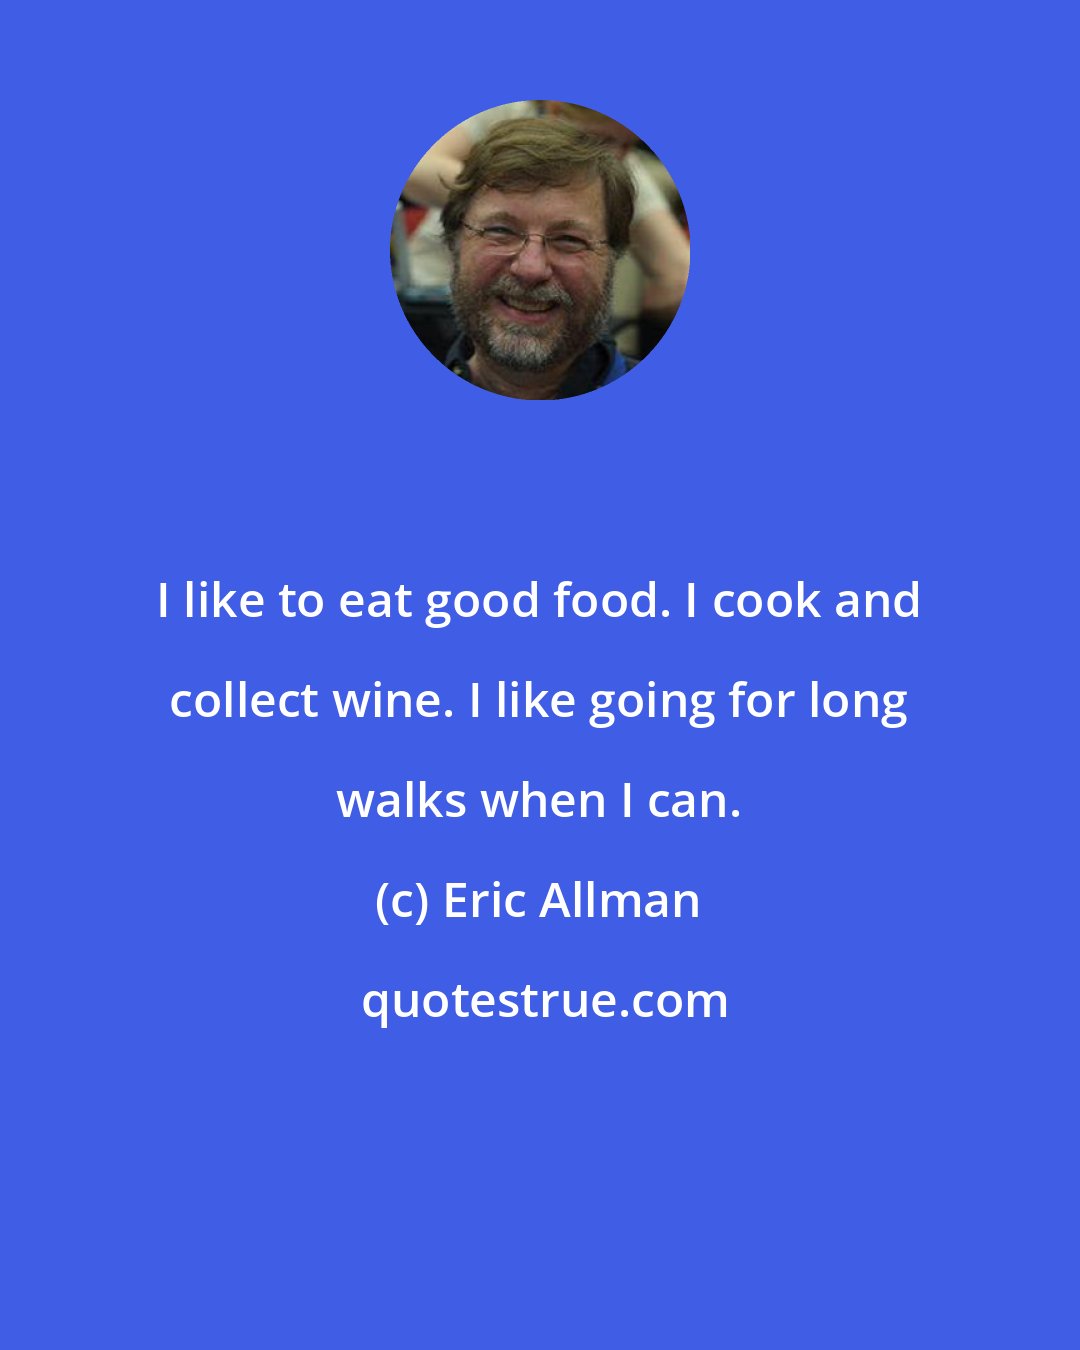 Eric Allman: I like to eat good food. I cook and collect wine. I like going for long walks when I can.